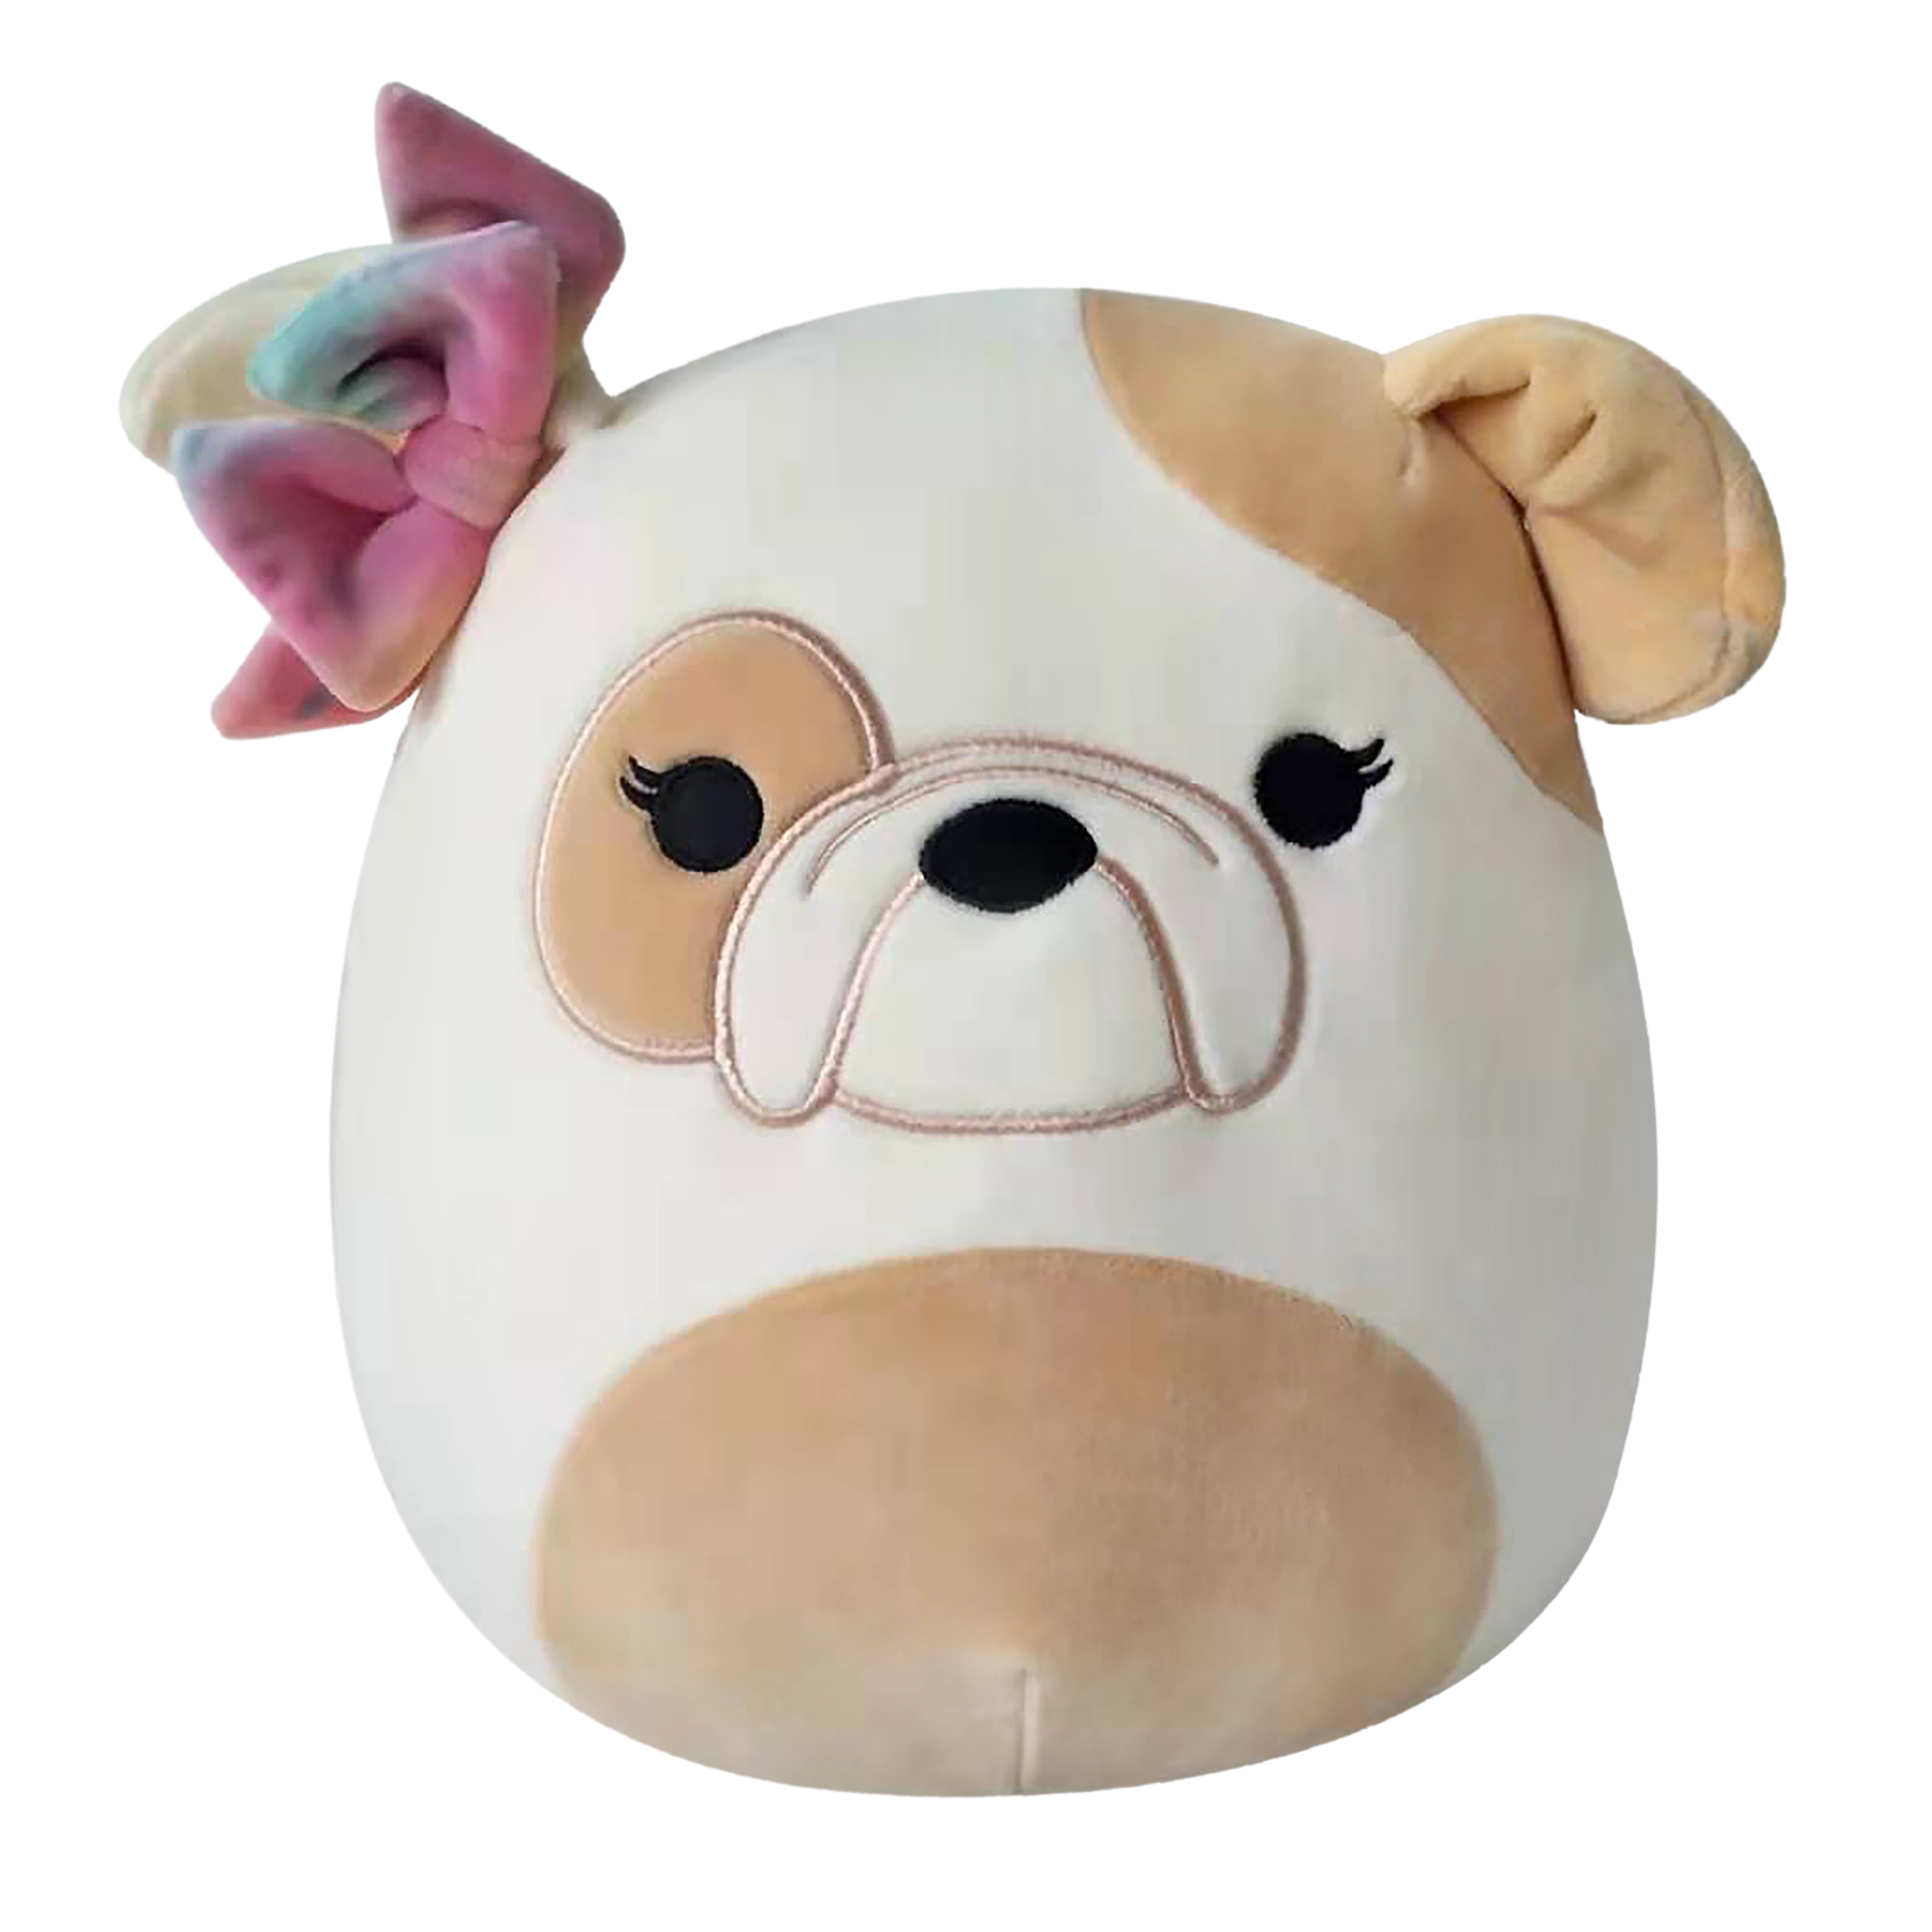 BRAND NEW WITH TAGS SQUISHMALLOWS DOUG THE DOG KELLYTOY 8" PLUSH 